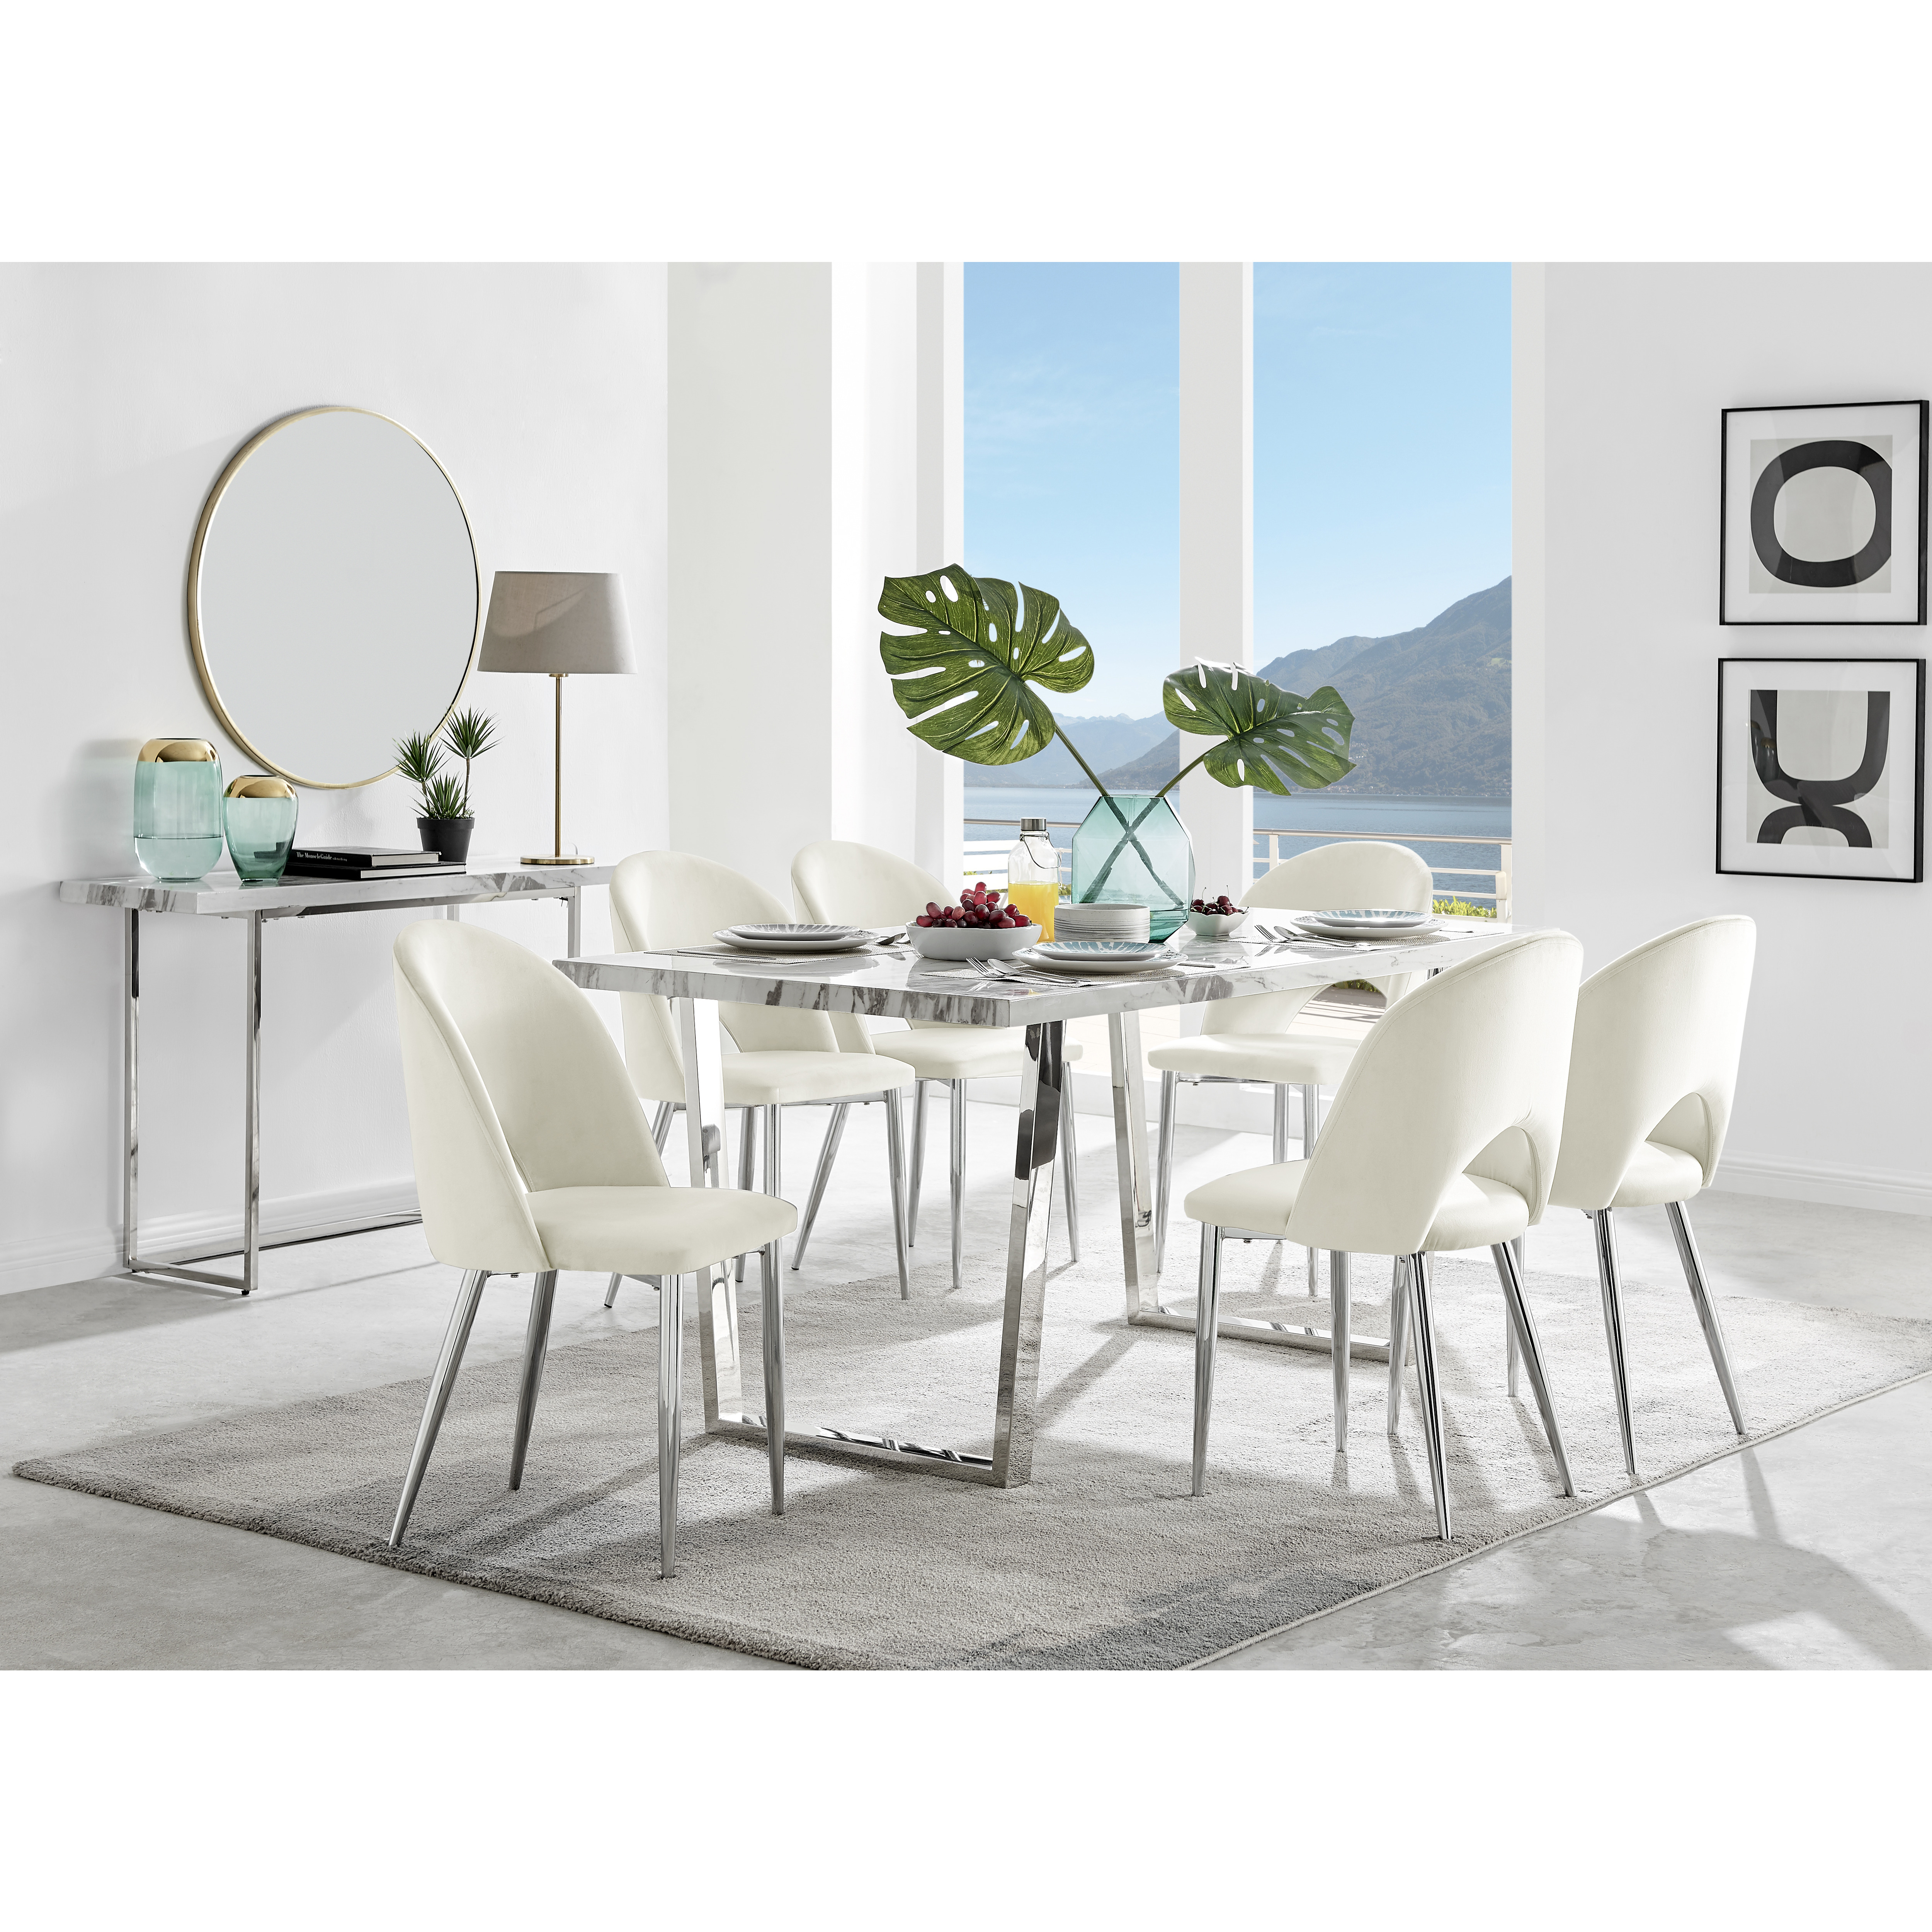 Kylo White Marble Effect Dining Table & 6 Arlon Silver Leg Chairs